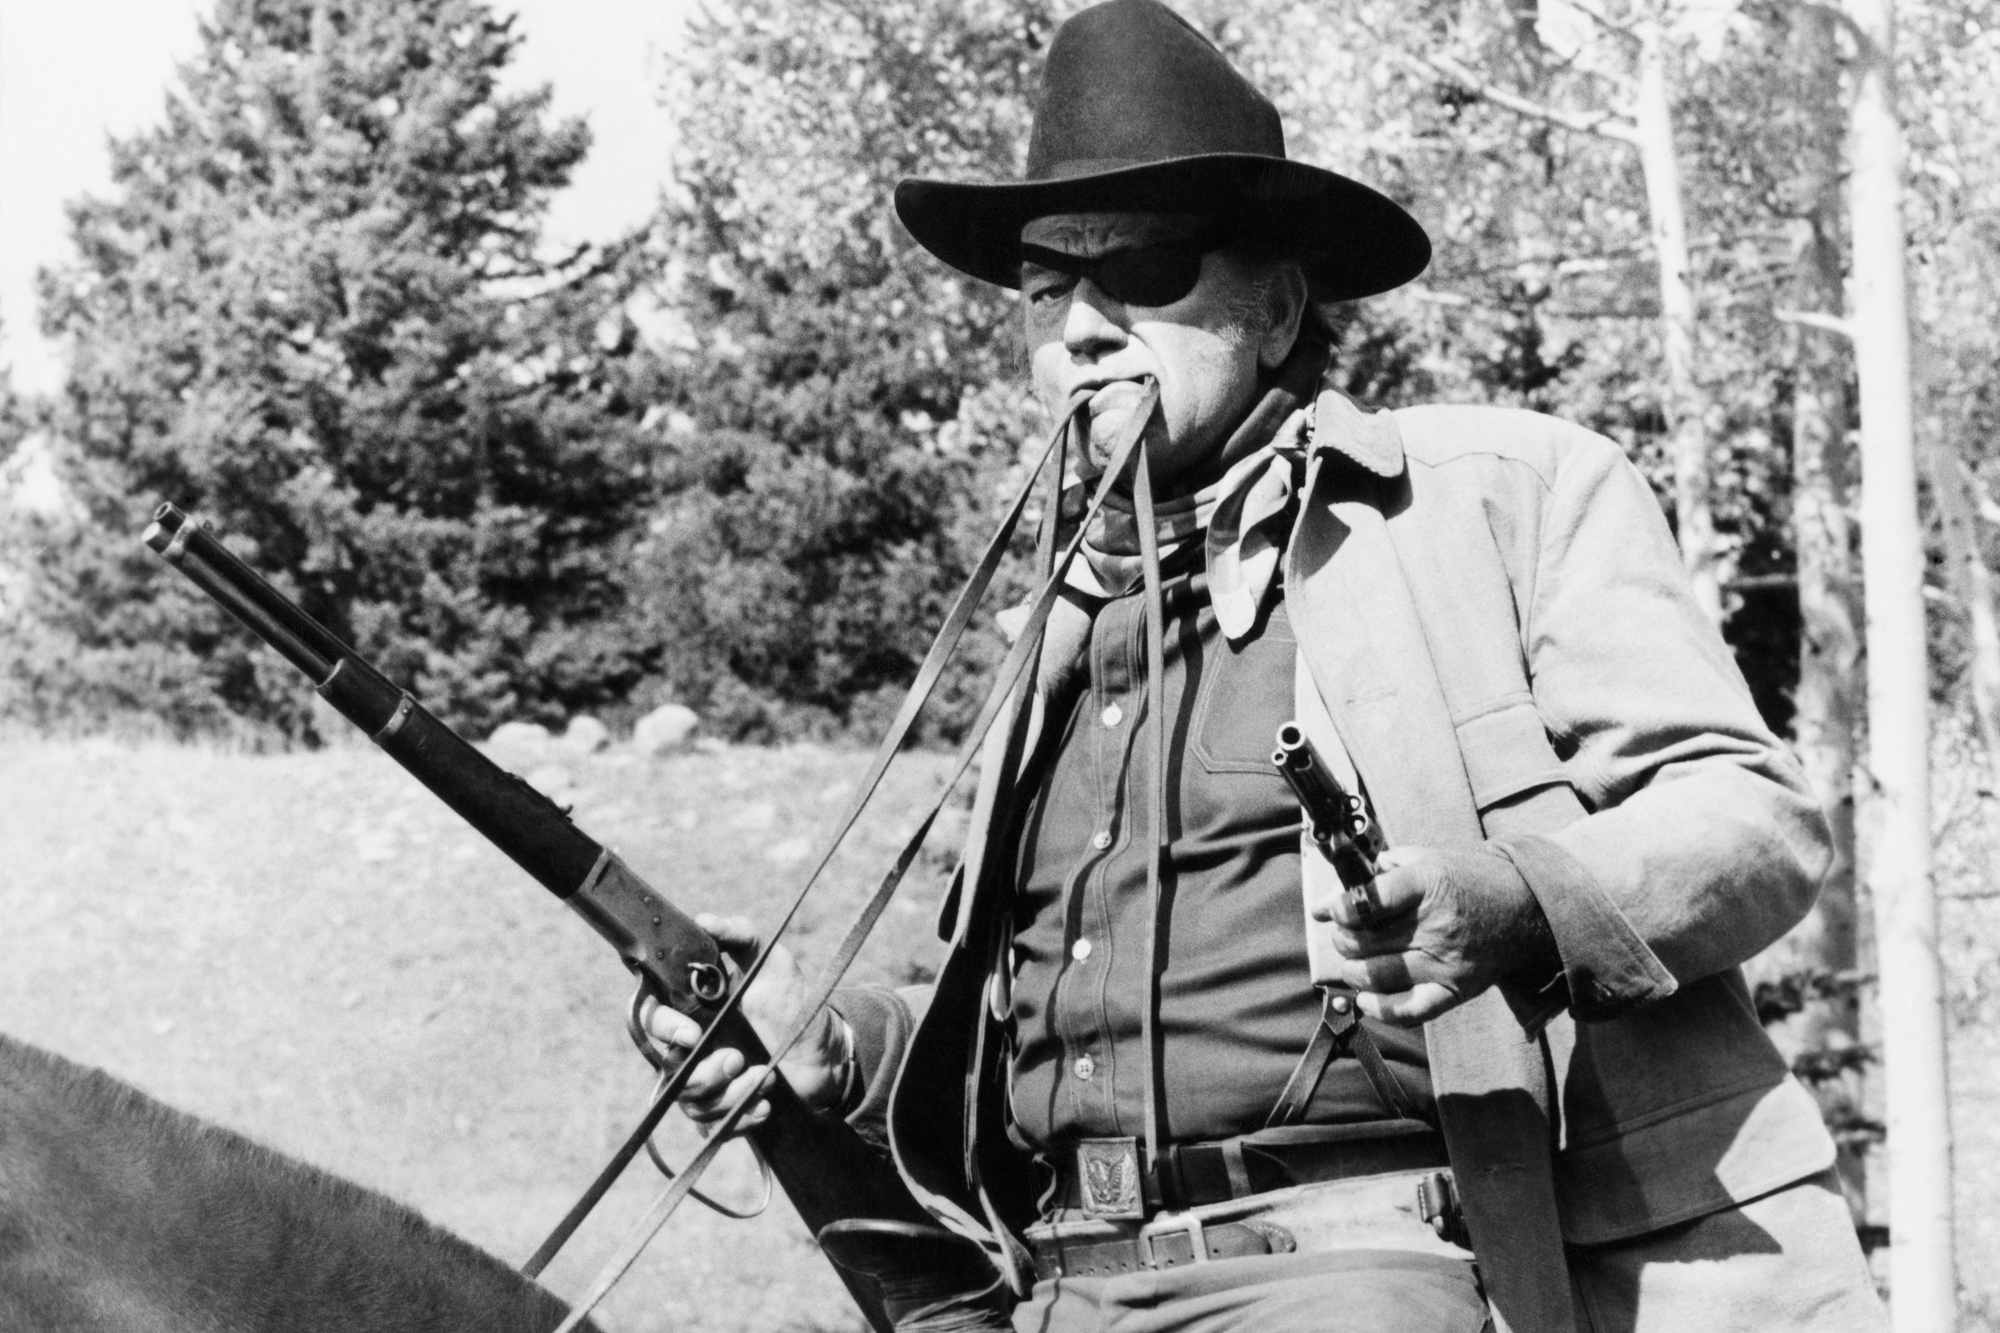 'True Grit' John Wayne as Rooster Cogburn, with iconic quotes. He's on a horse, holding its reins in his mouth, while holding guns in his hands.